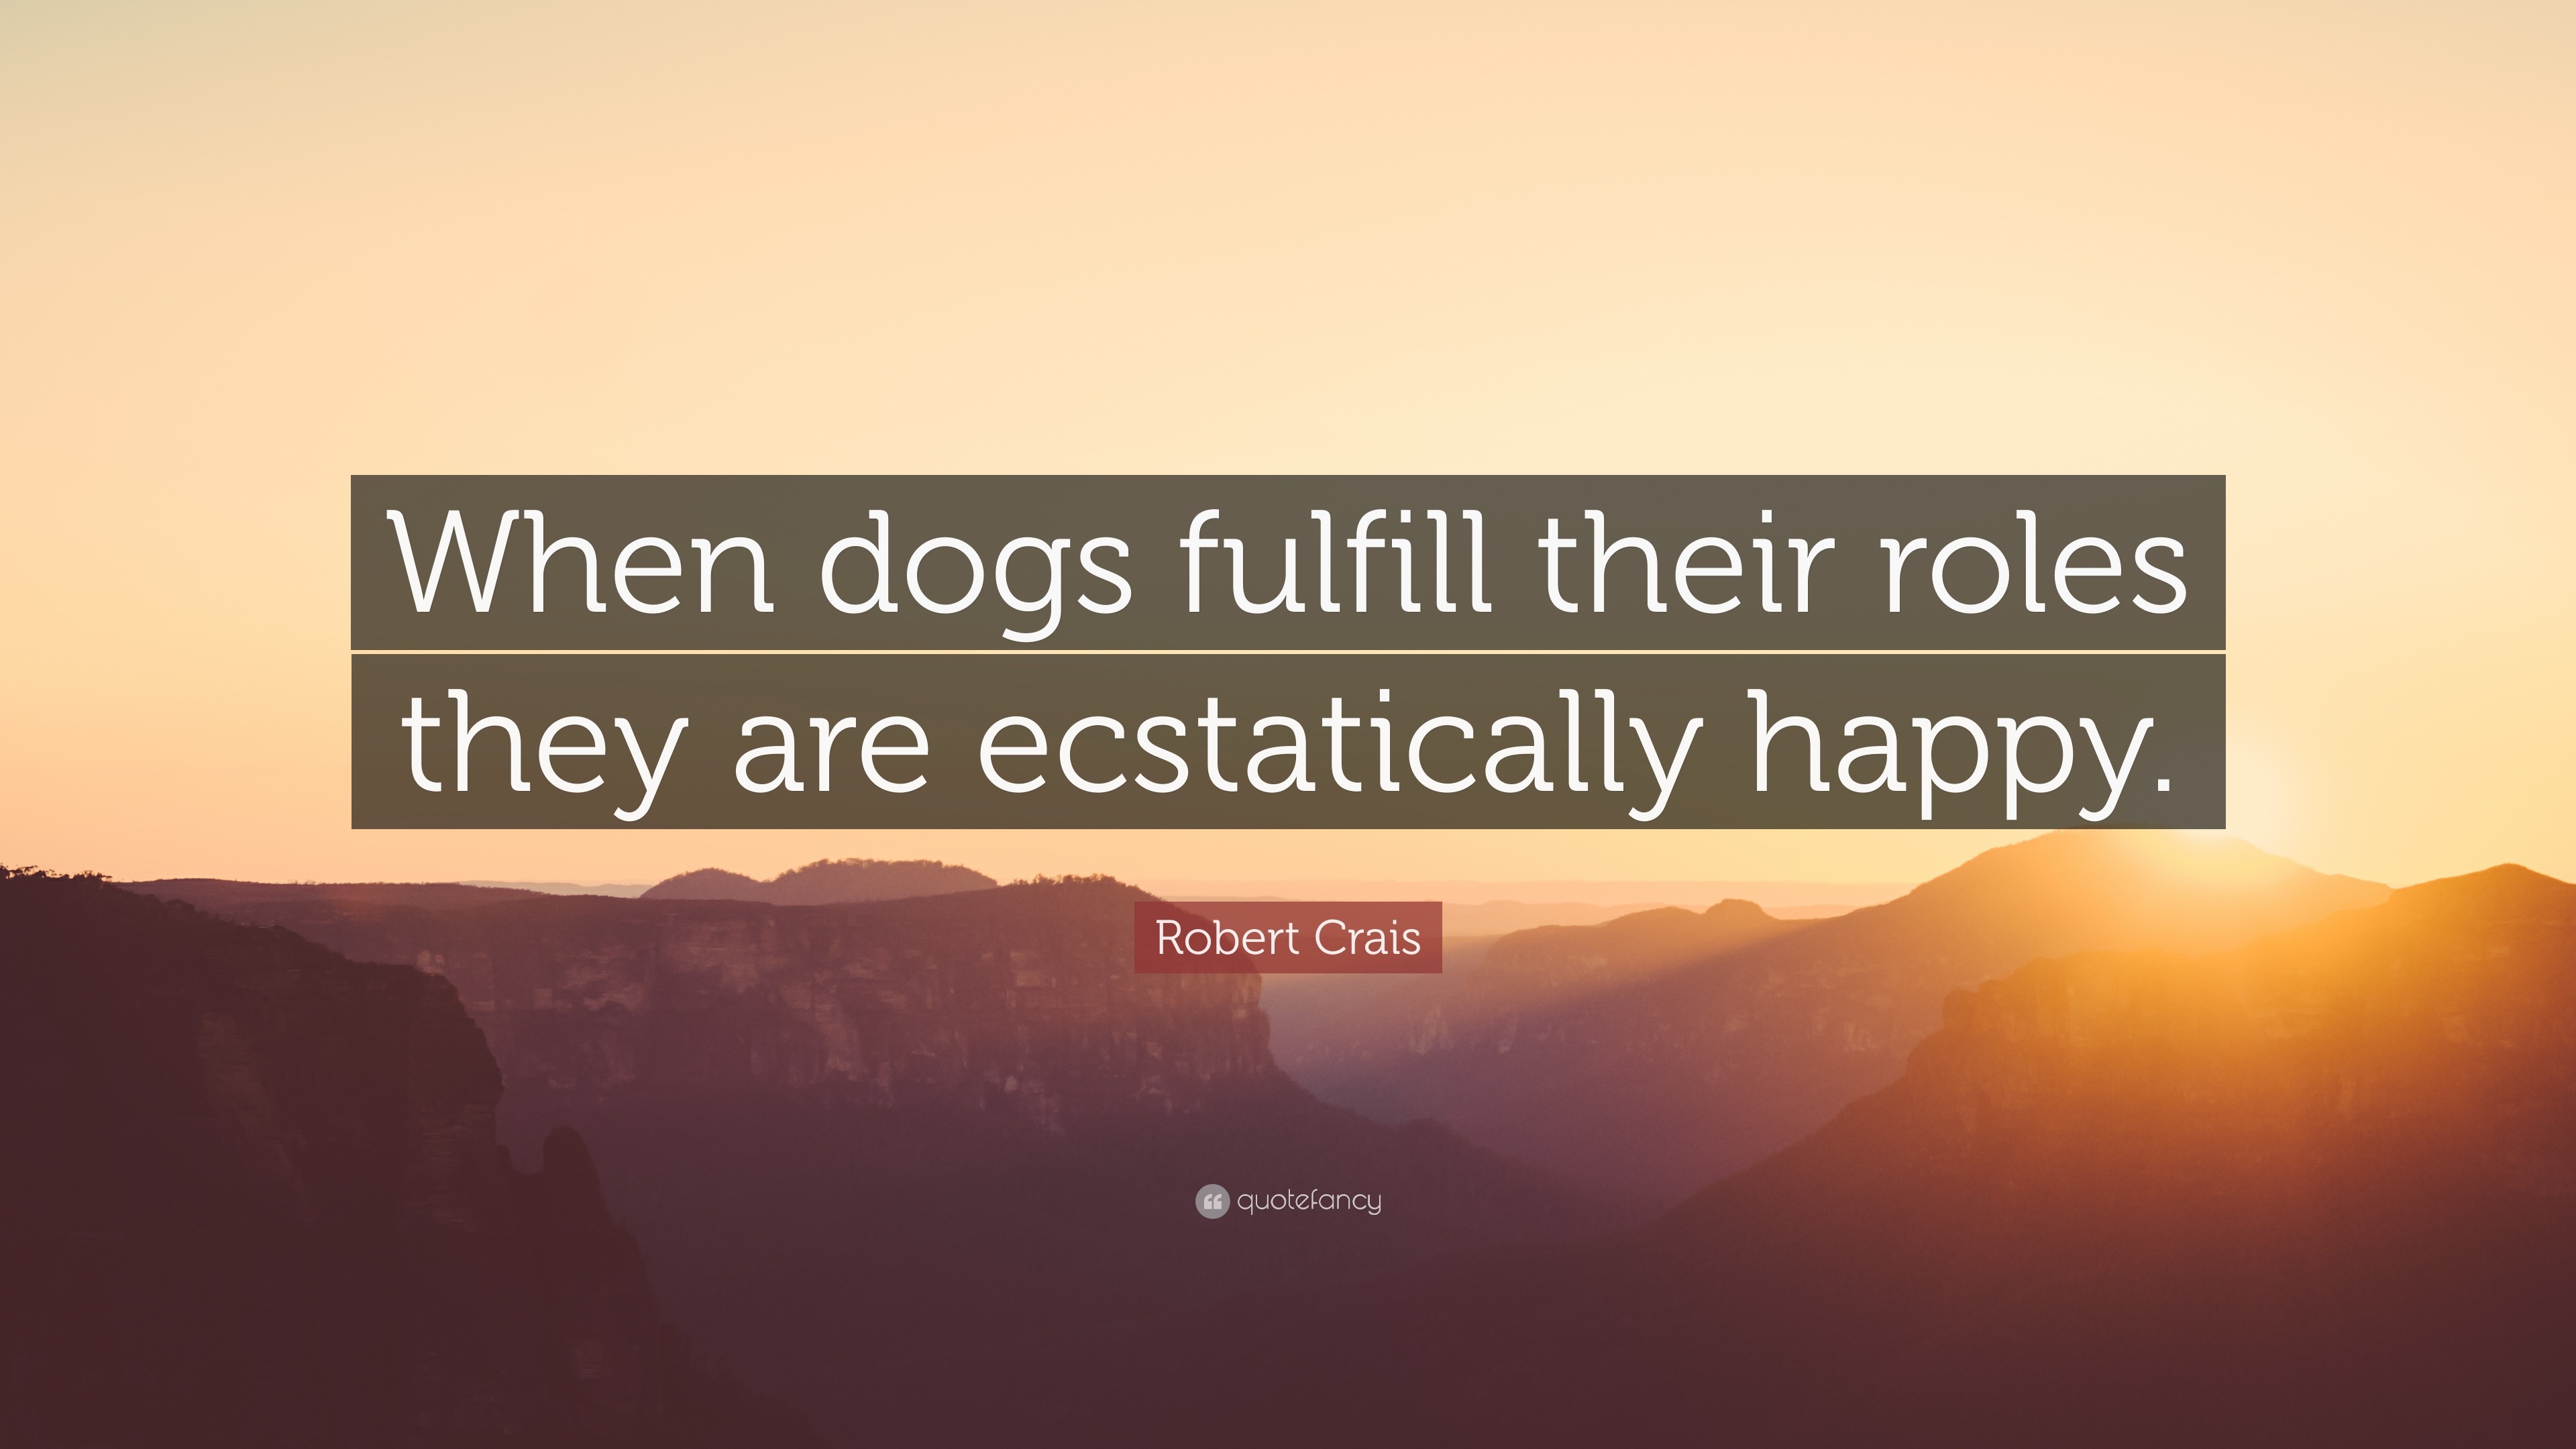 Robert Crais Quote: “When dogs fulfill their roles they are ...